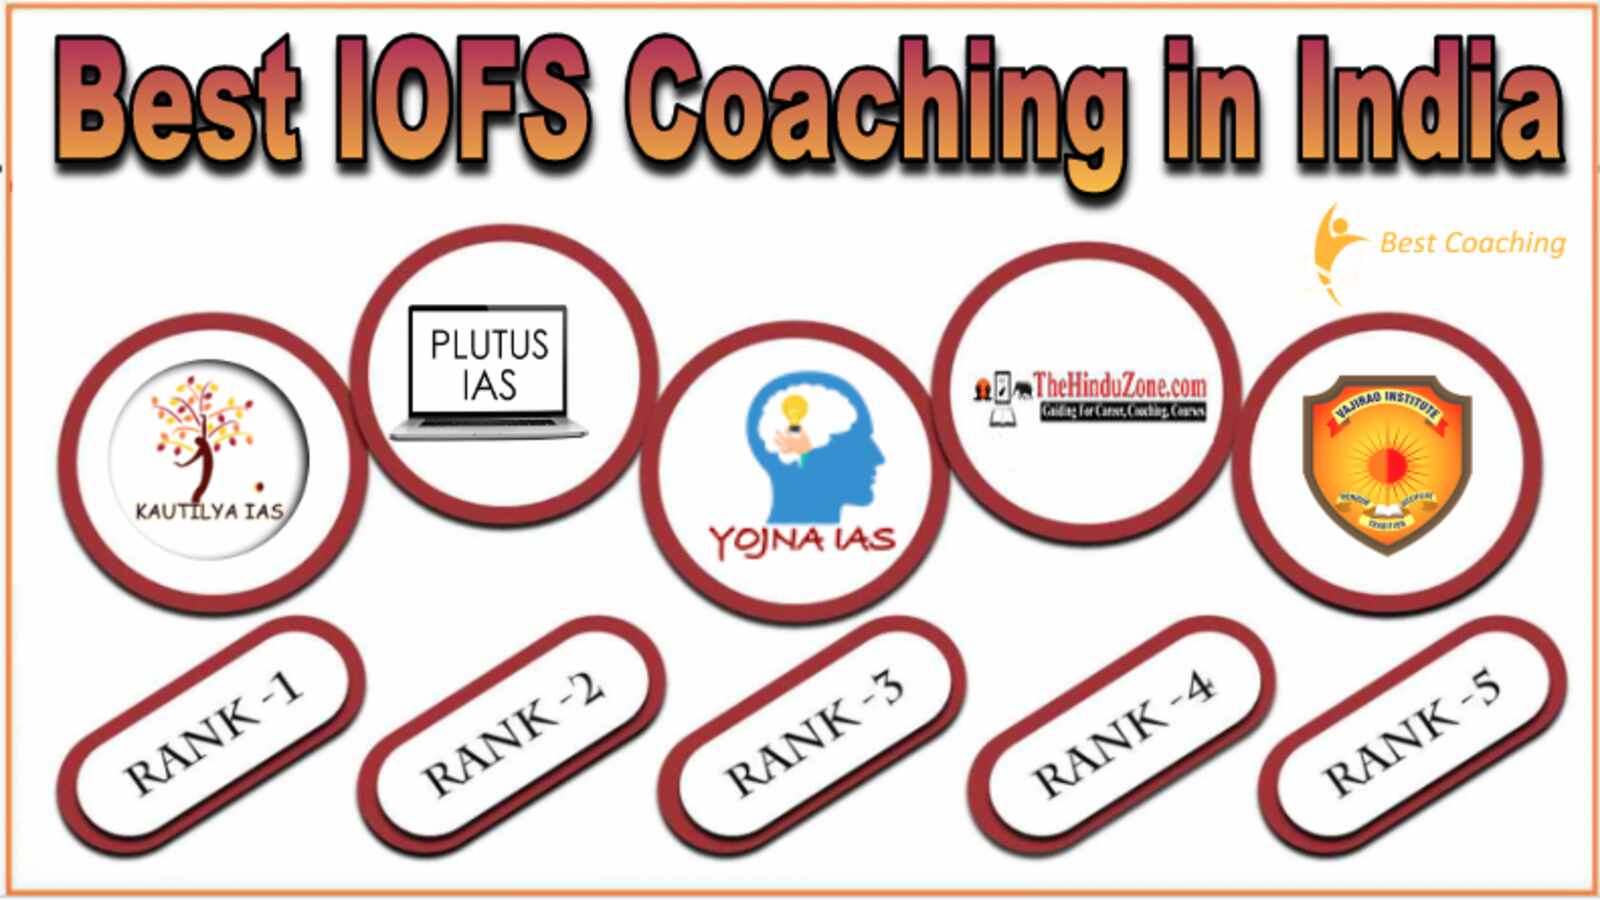 Best IOFS Coaching in India